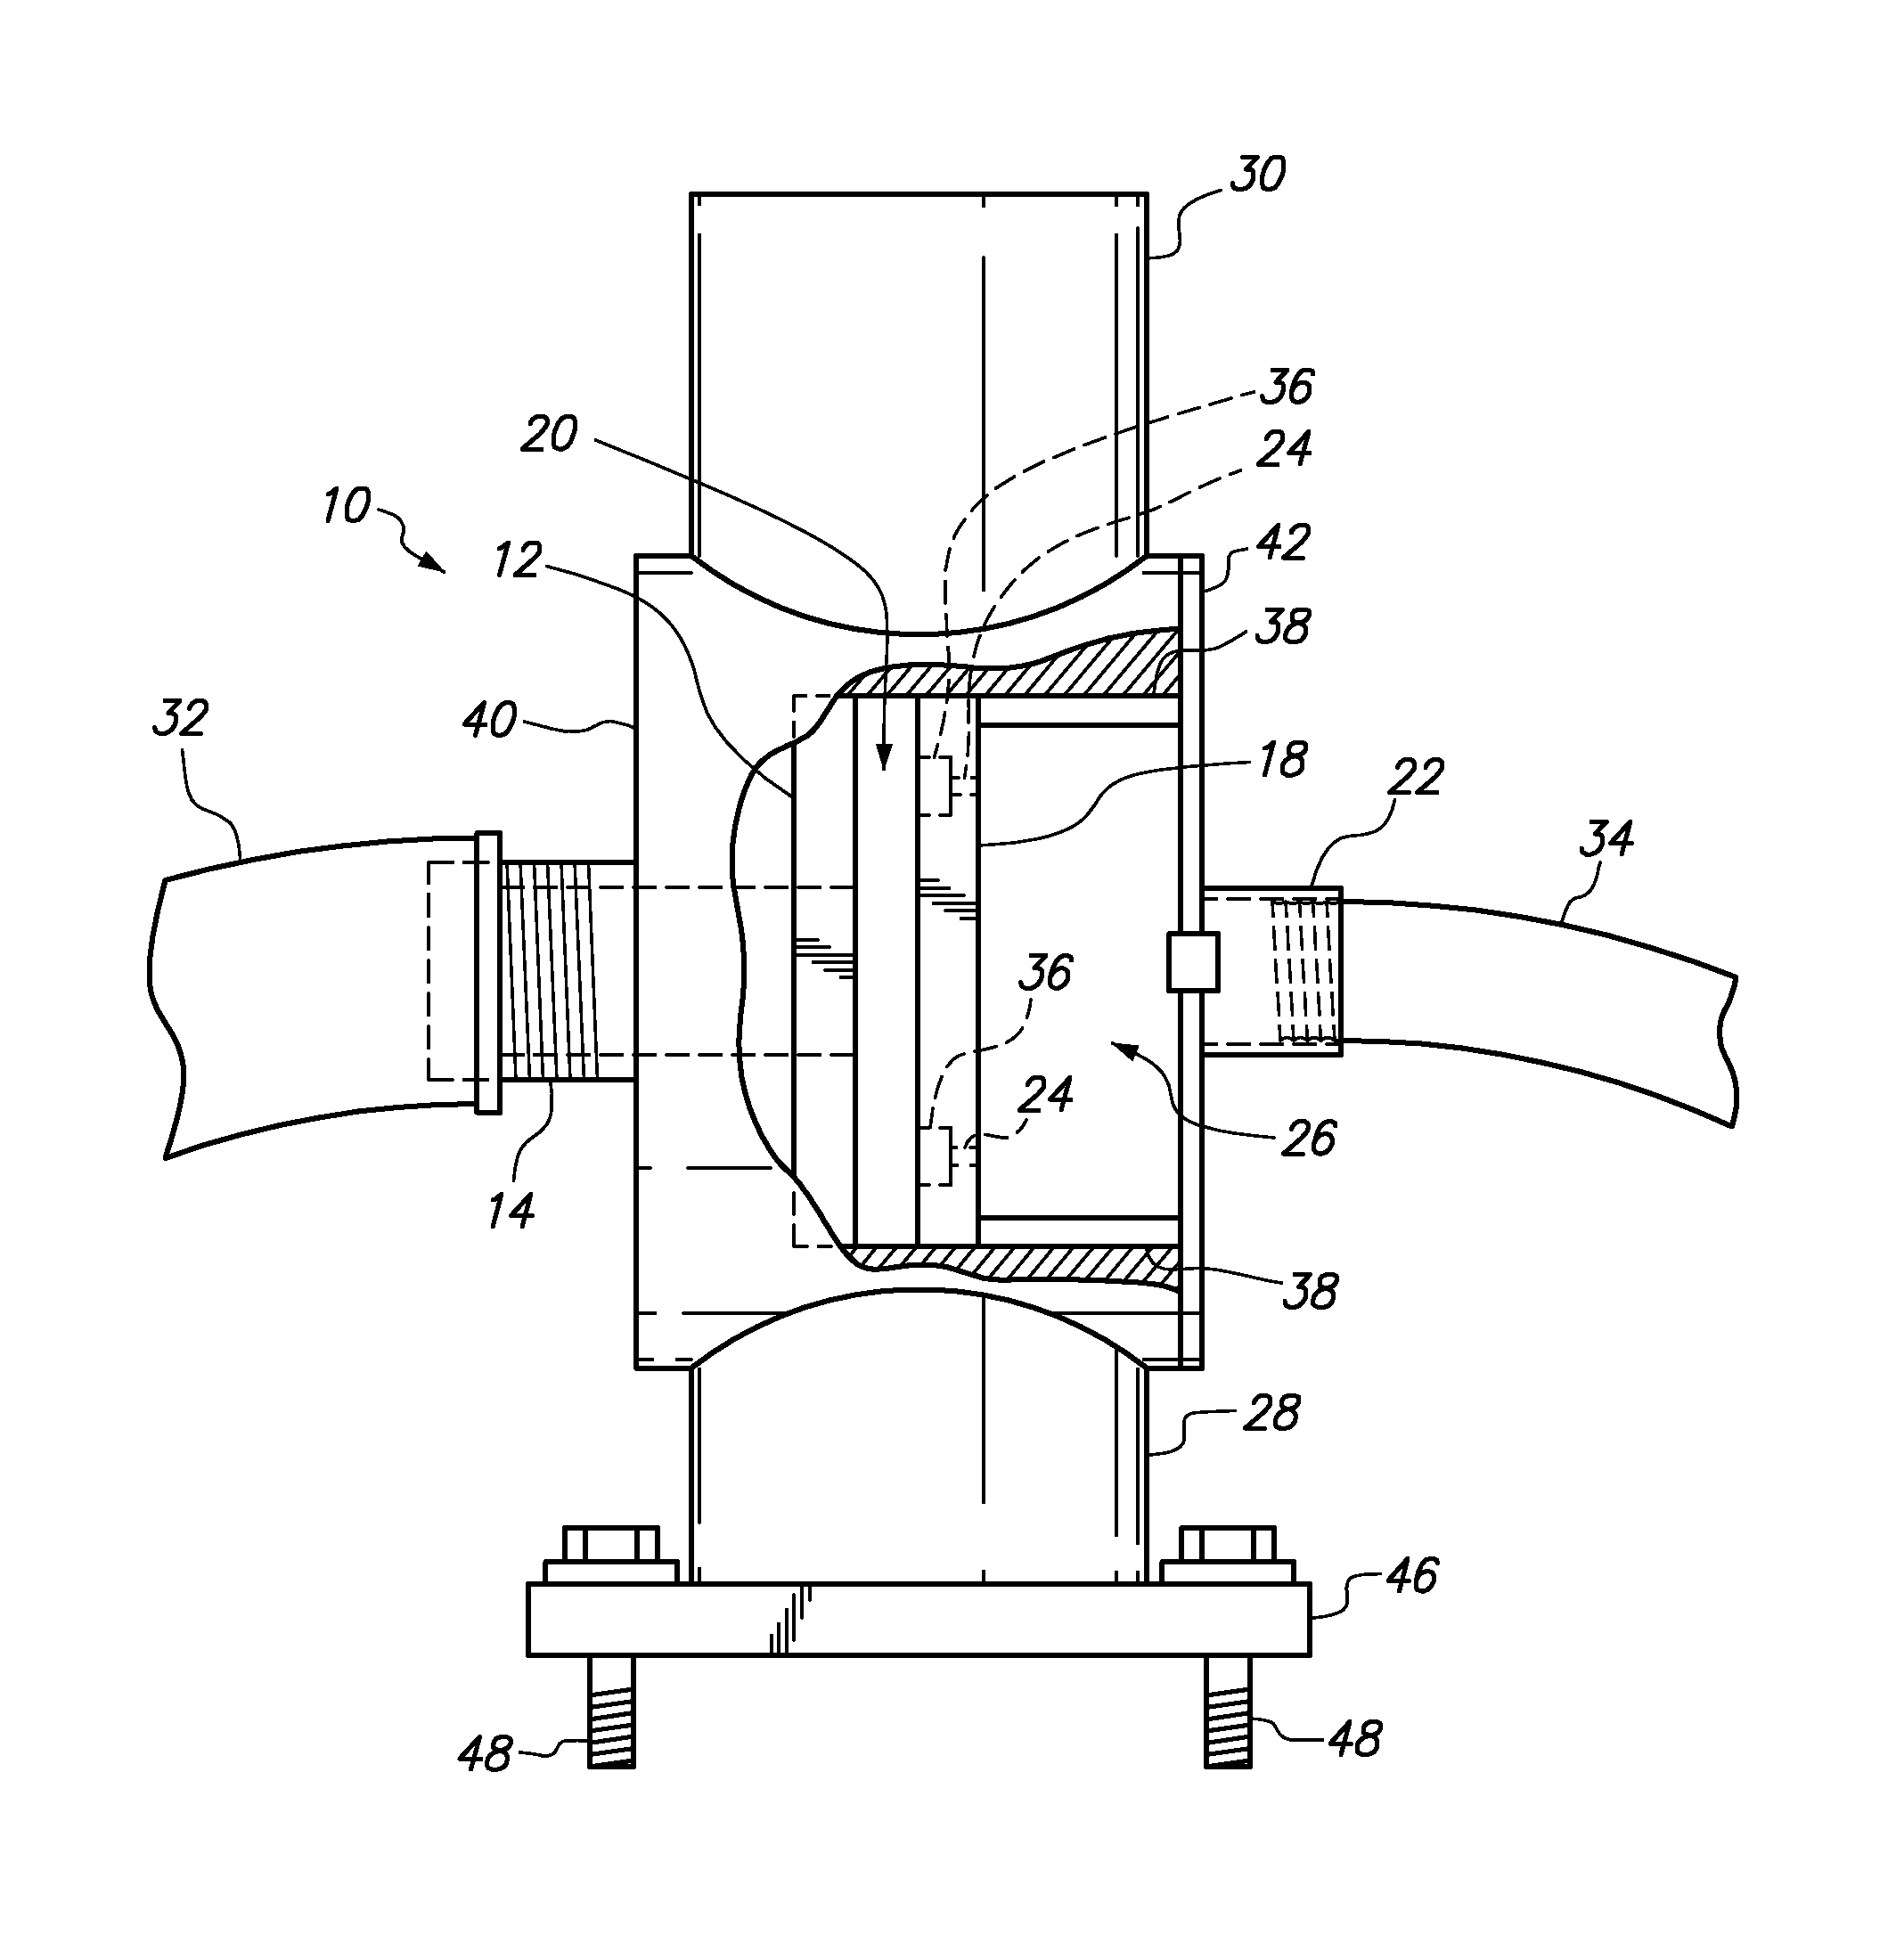 Foam generating apparatus and method for compressed air foam systems